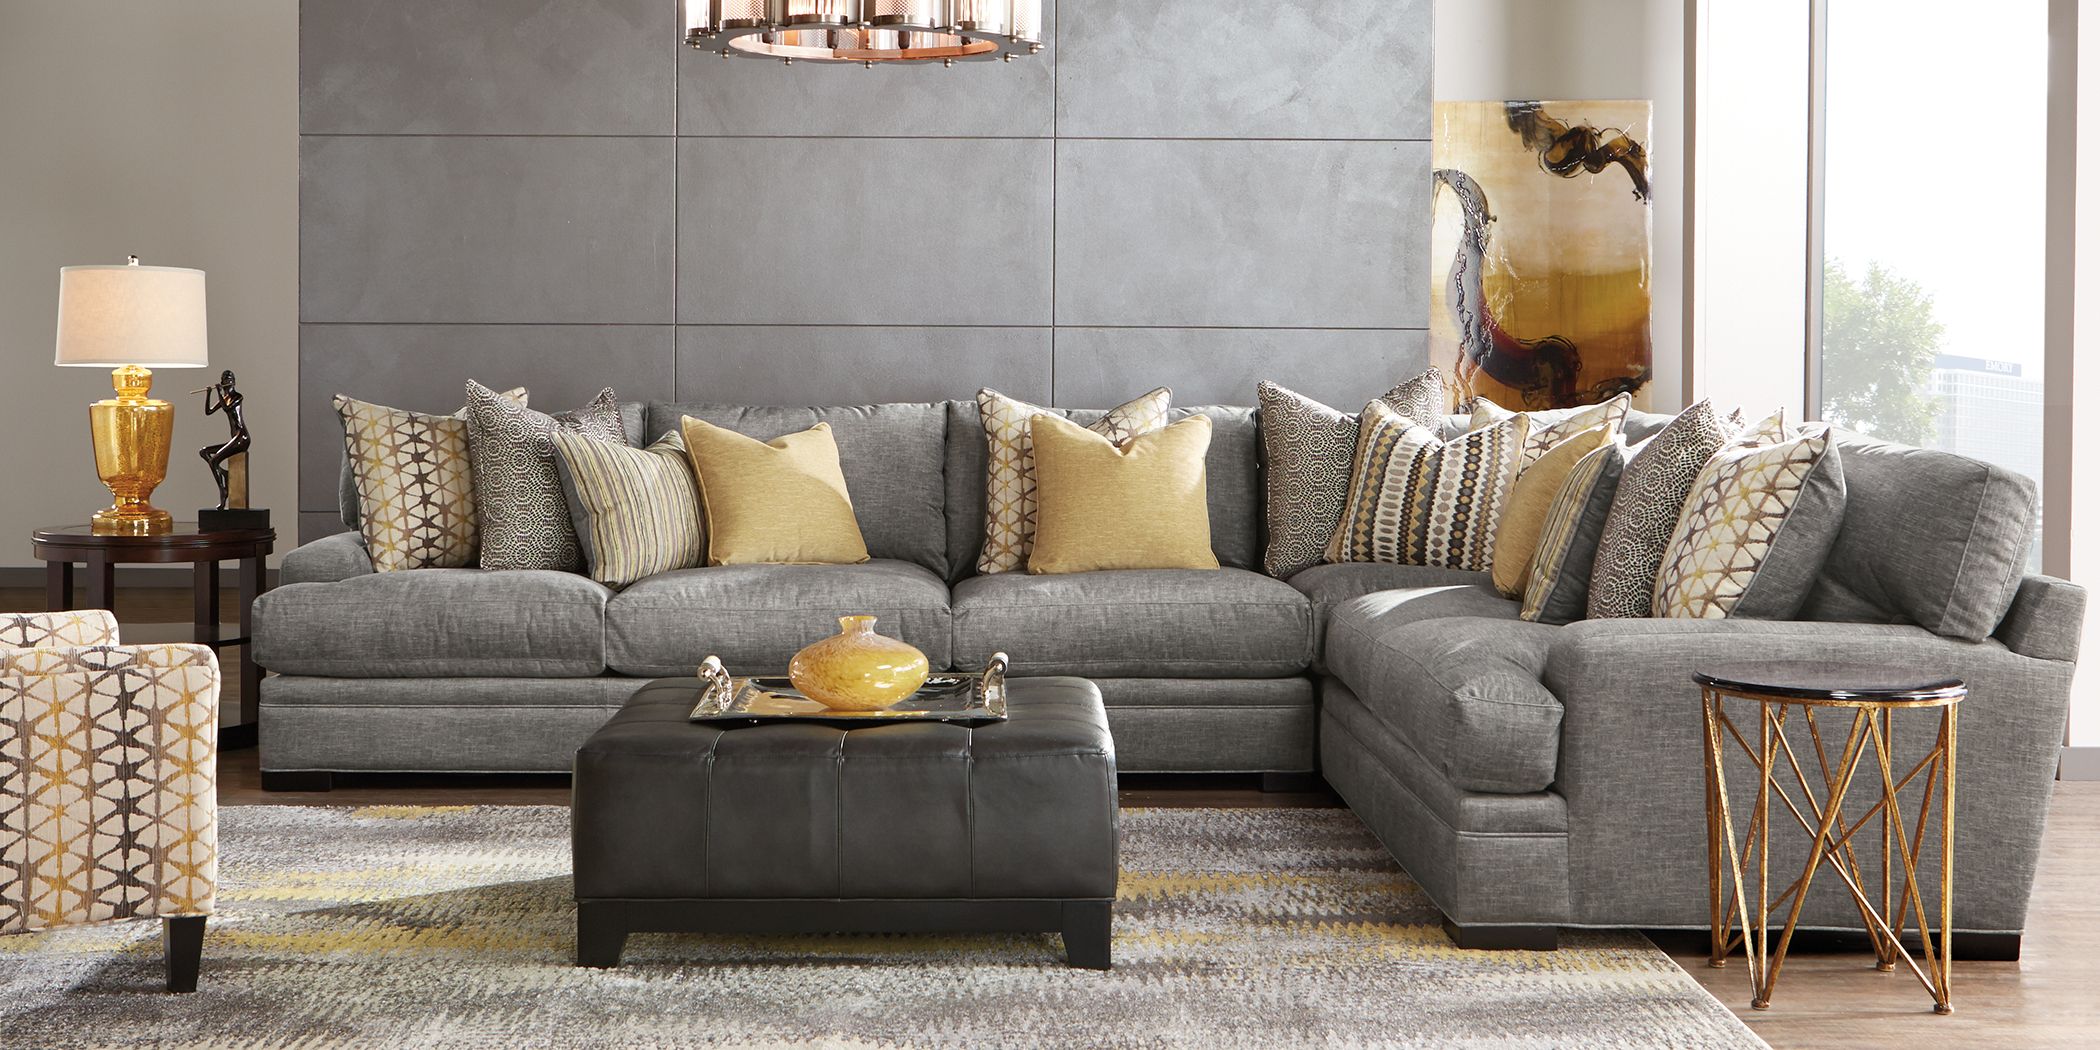 Https Wwwroomstogocom Furniture Product Cindy Crawford Home Palm Springs Gray 4 Pc Sectional 1109555P